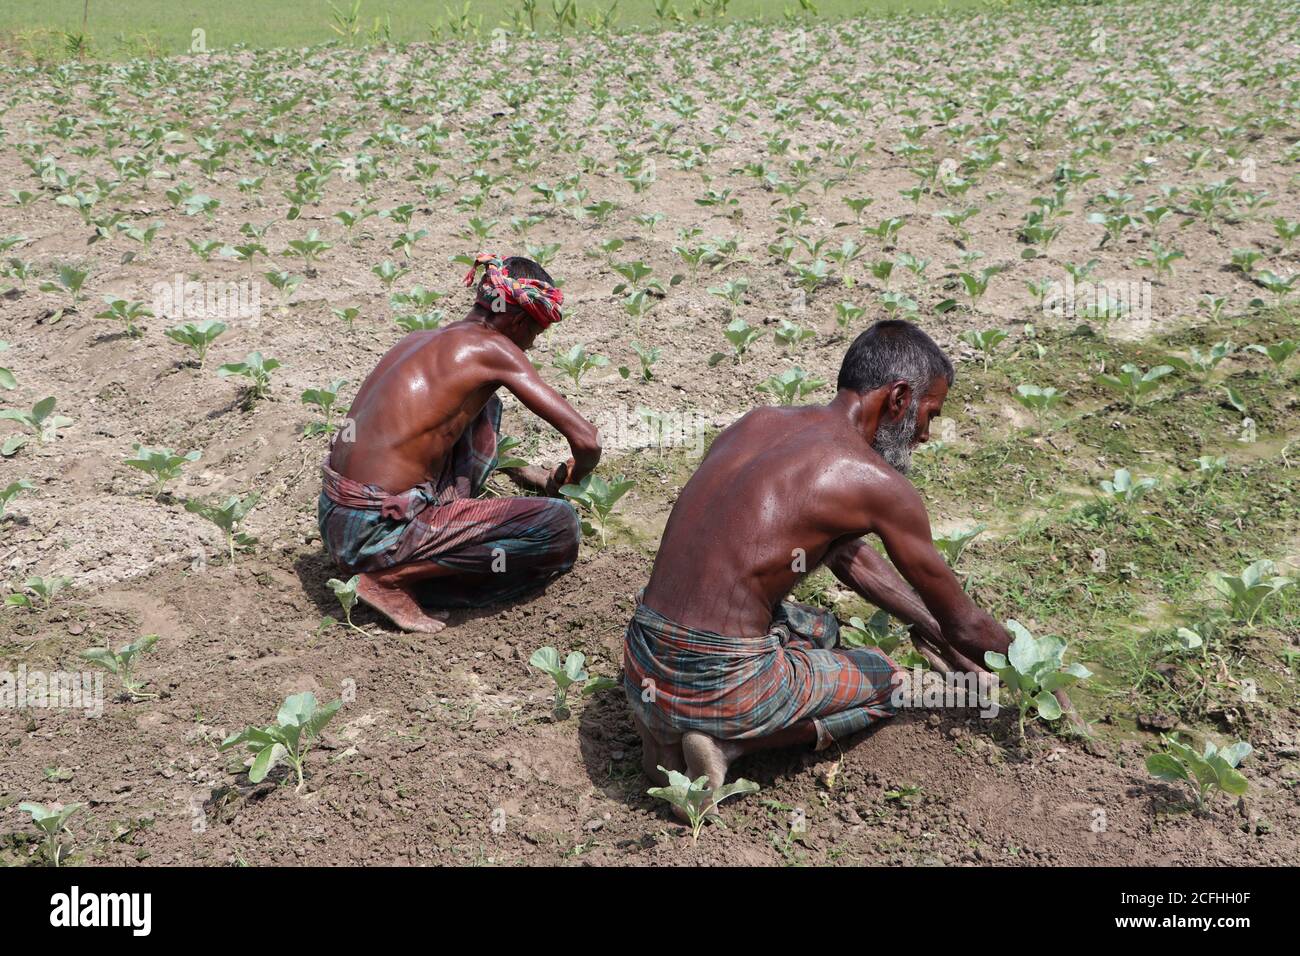 Two Asian sweaty workers (day laborers) are working on the vegetable (cauliflower) field in a rural area of Bangladesh Stock Photo